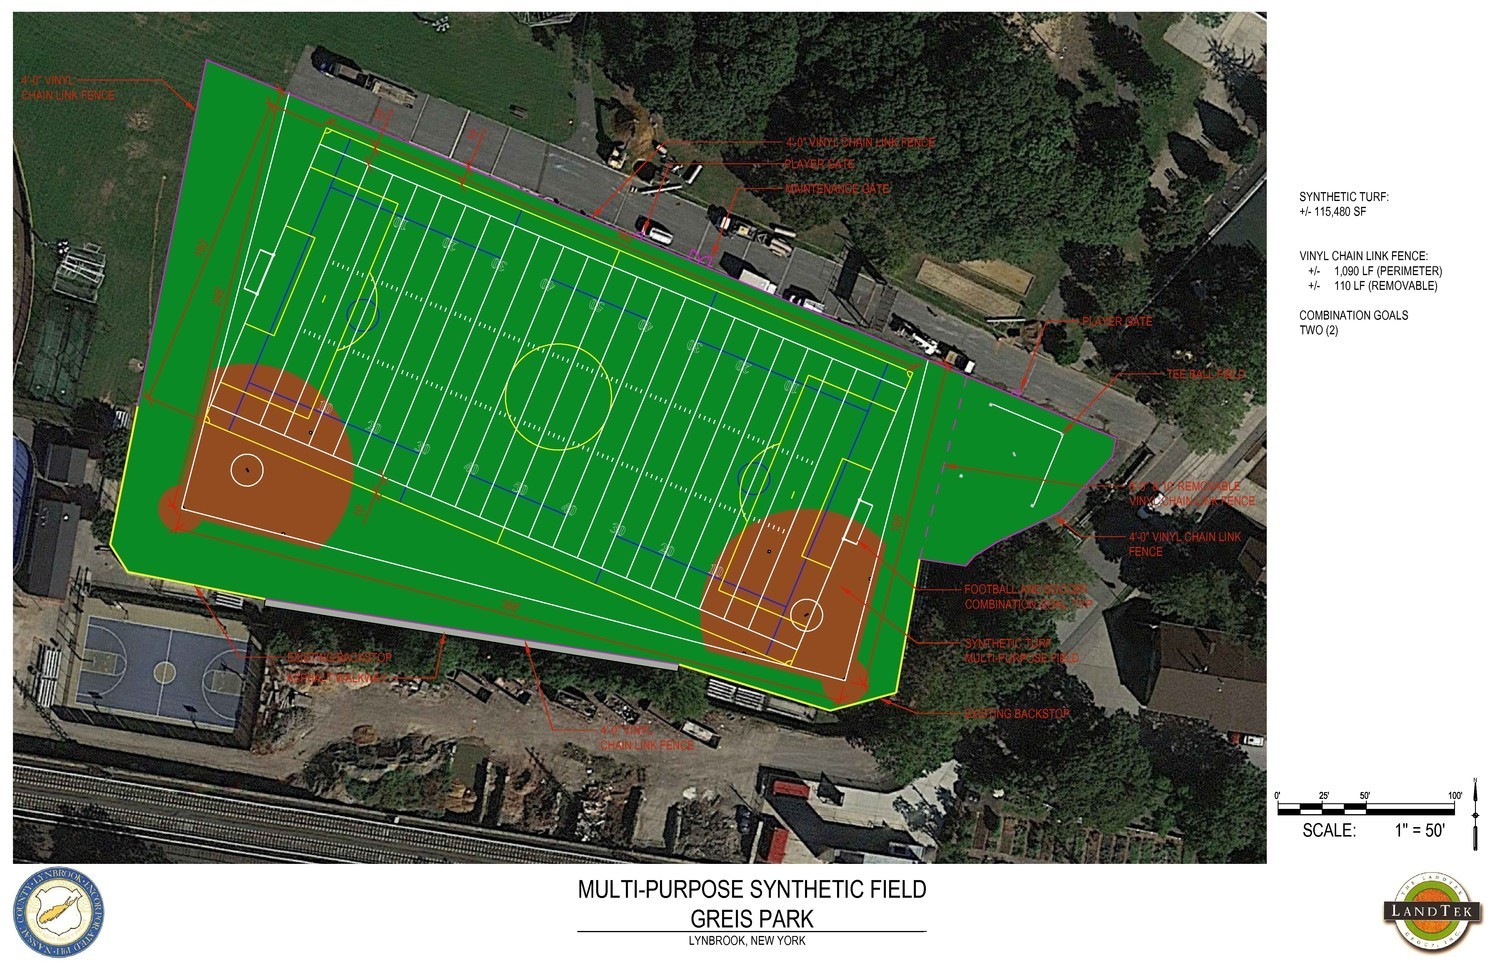 Officials want to move forward with a turf field, but will likely include it as part of the master plan.